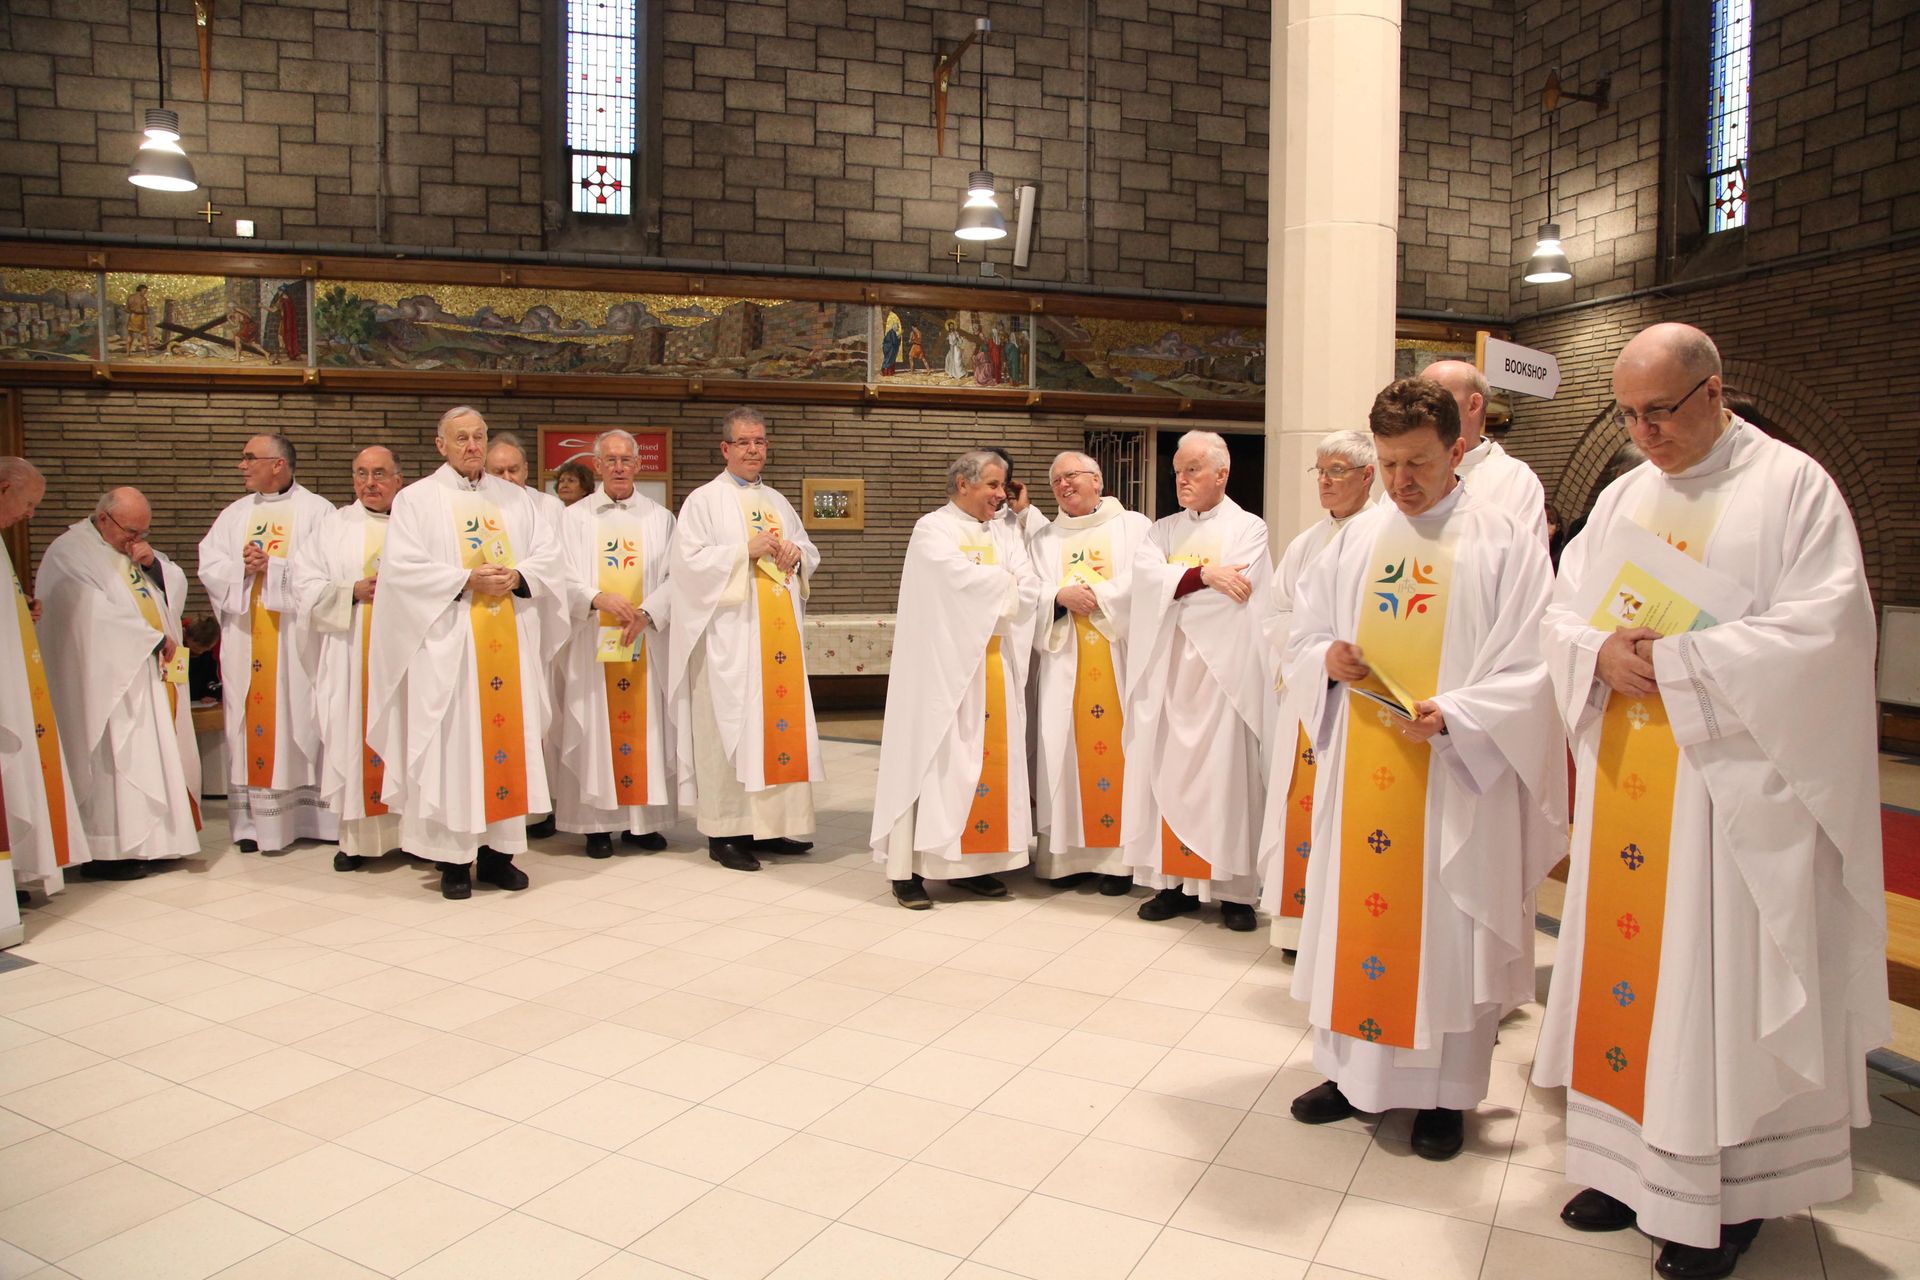 A group of priests are standing in a church